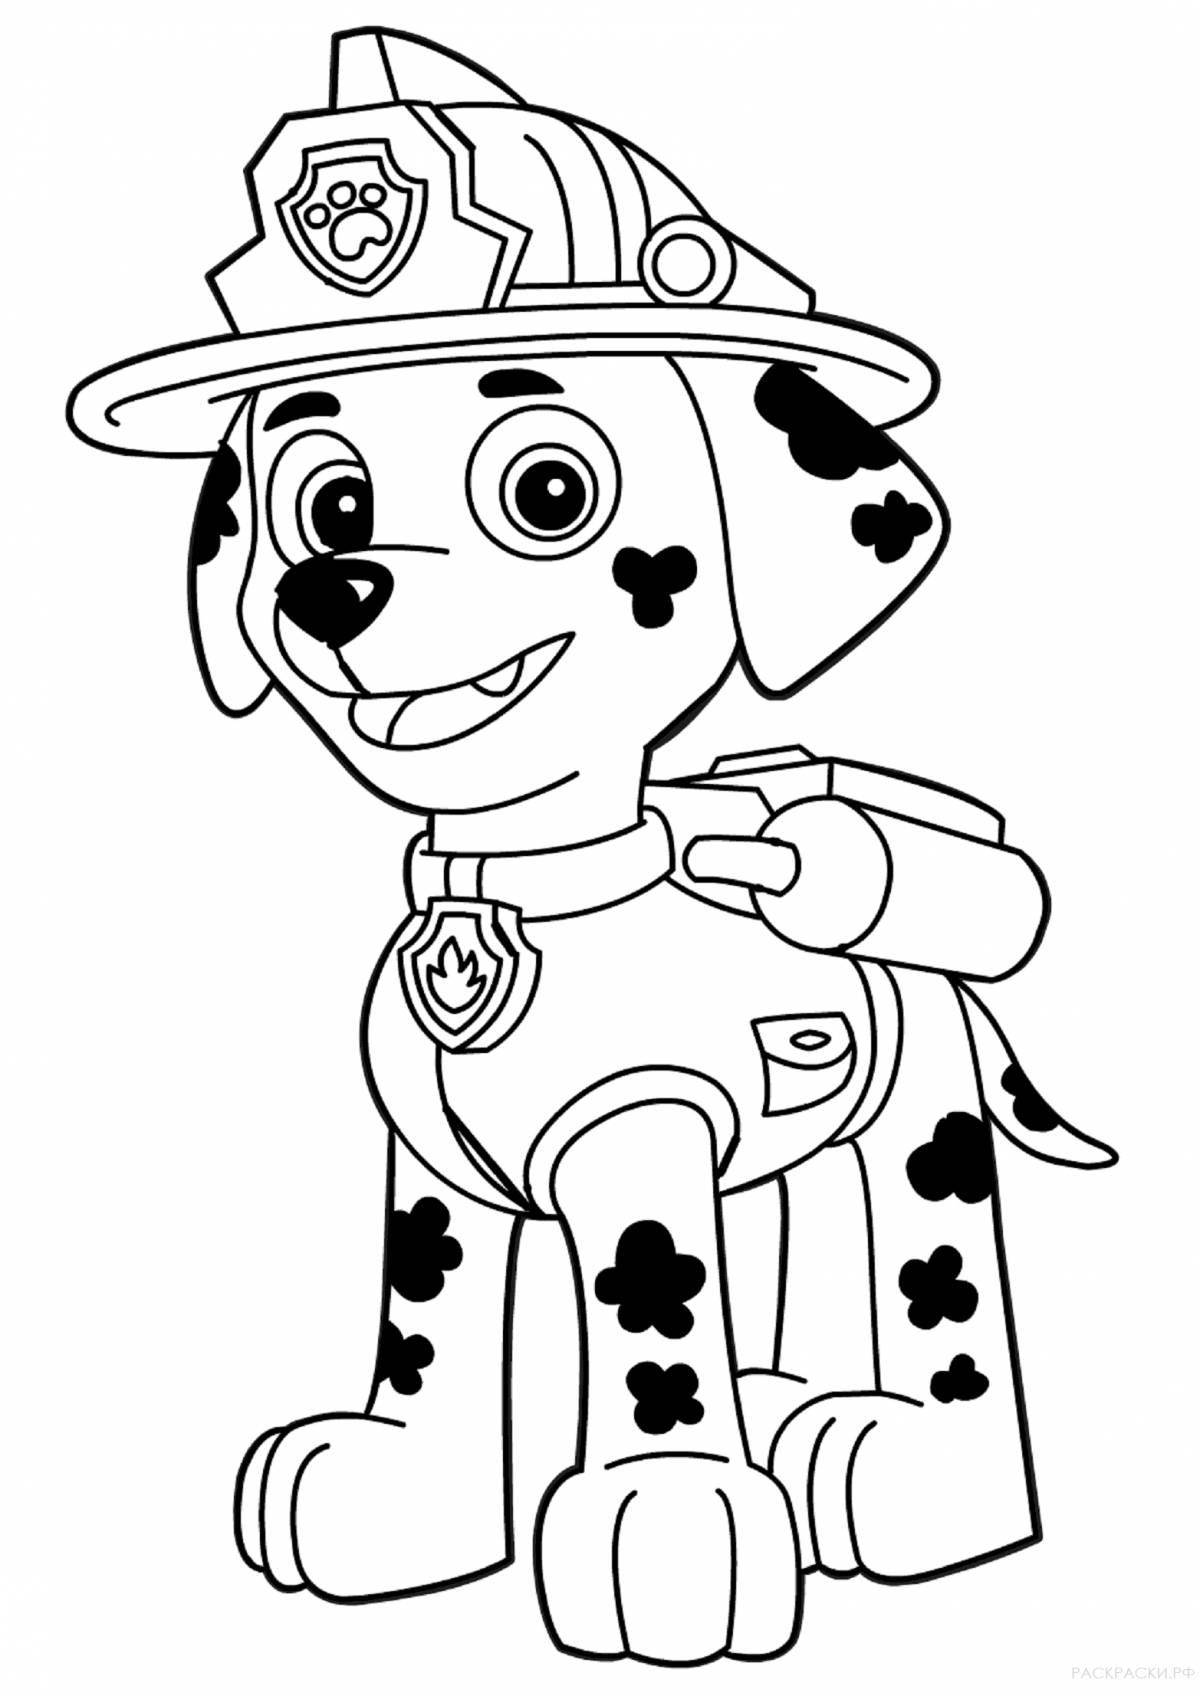 Sleeping puppy coloring book